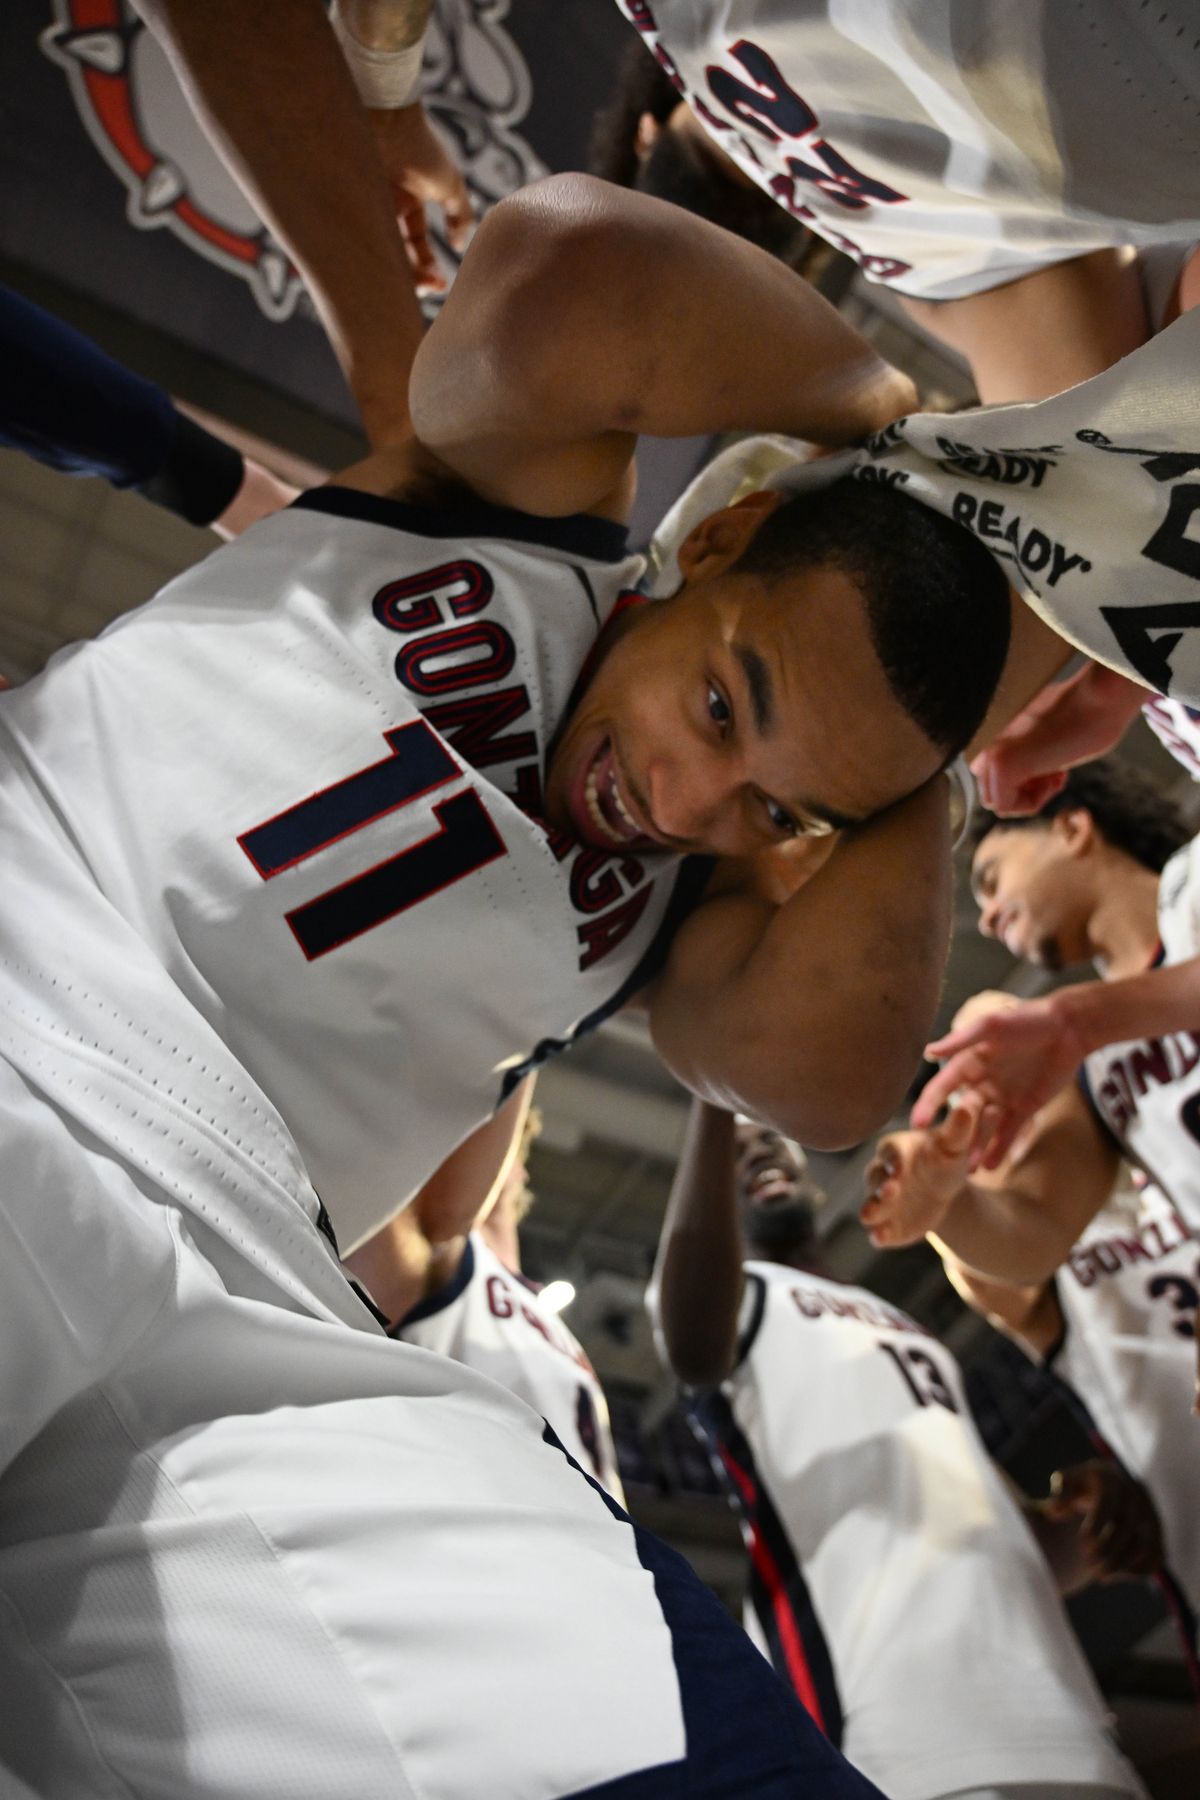 Gonzaga’s Nolan Hickman is razzed by teammates after being named player of the game in the Zags’ rout over LMU on Tuesday.  (By Colin Mulvany/The Spokesman-Review)